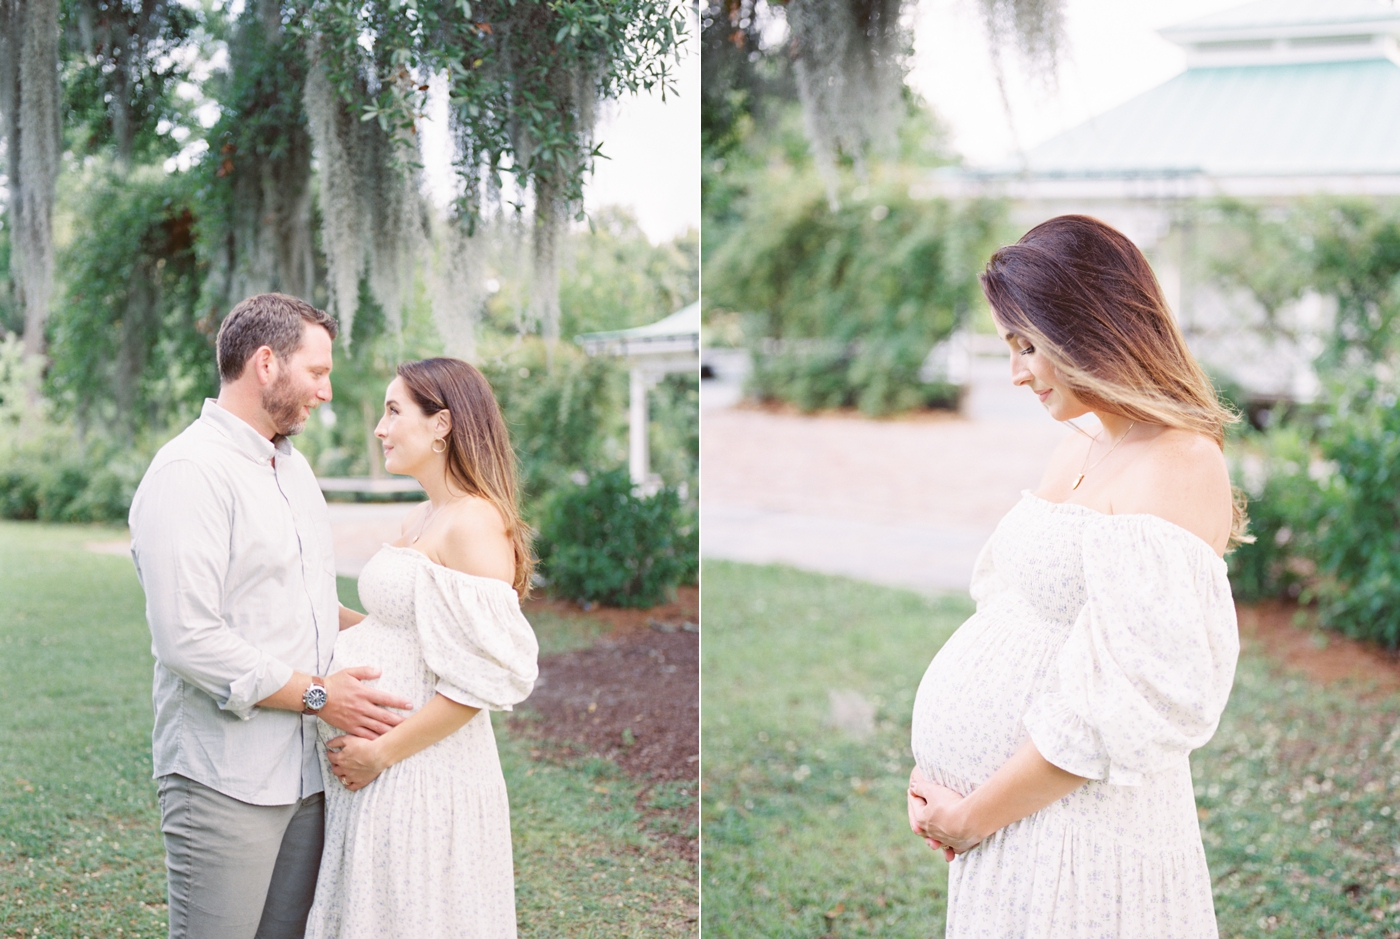 Mom and dad to be in Hampton Park | Photo by Caitlyn Motycka Photography.